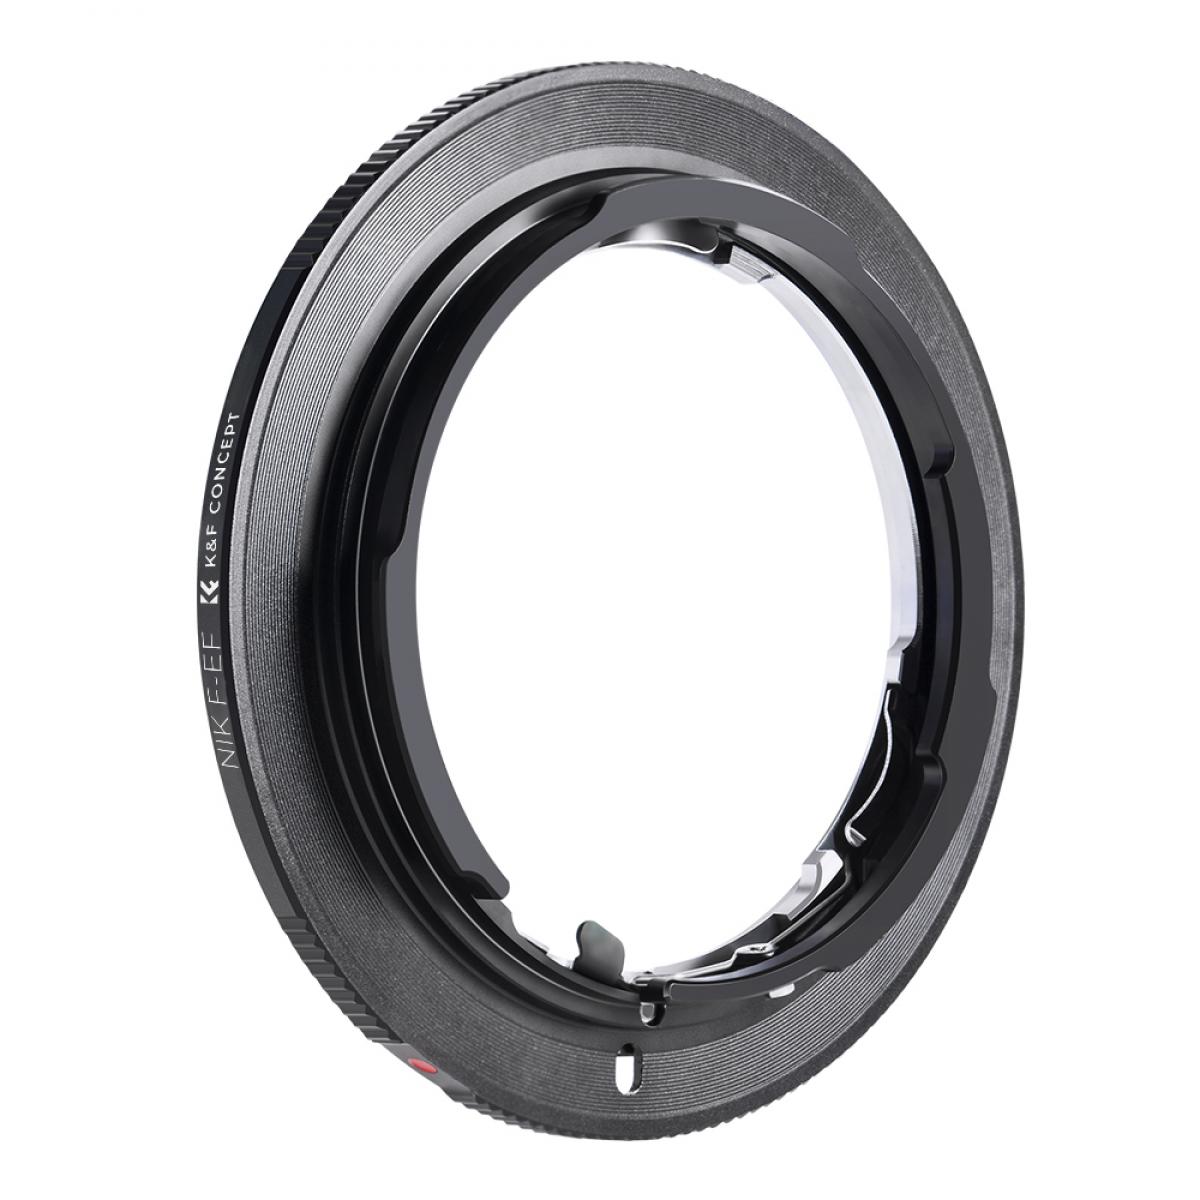 Nkon to EOS Lens Mount Adapter, Compatible with Nikon AI/F AI-S Lens and Compatible with Canon EOS EF/EF-S Cameras